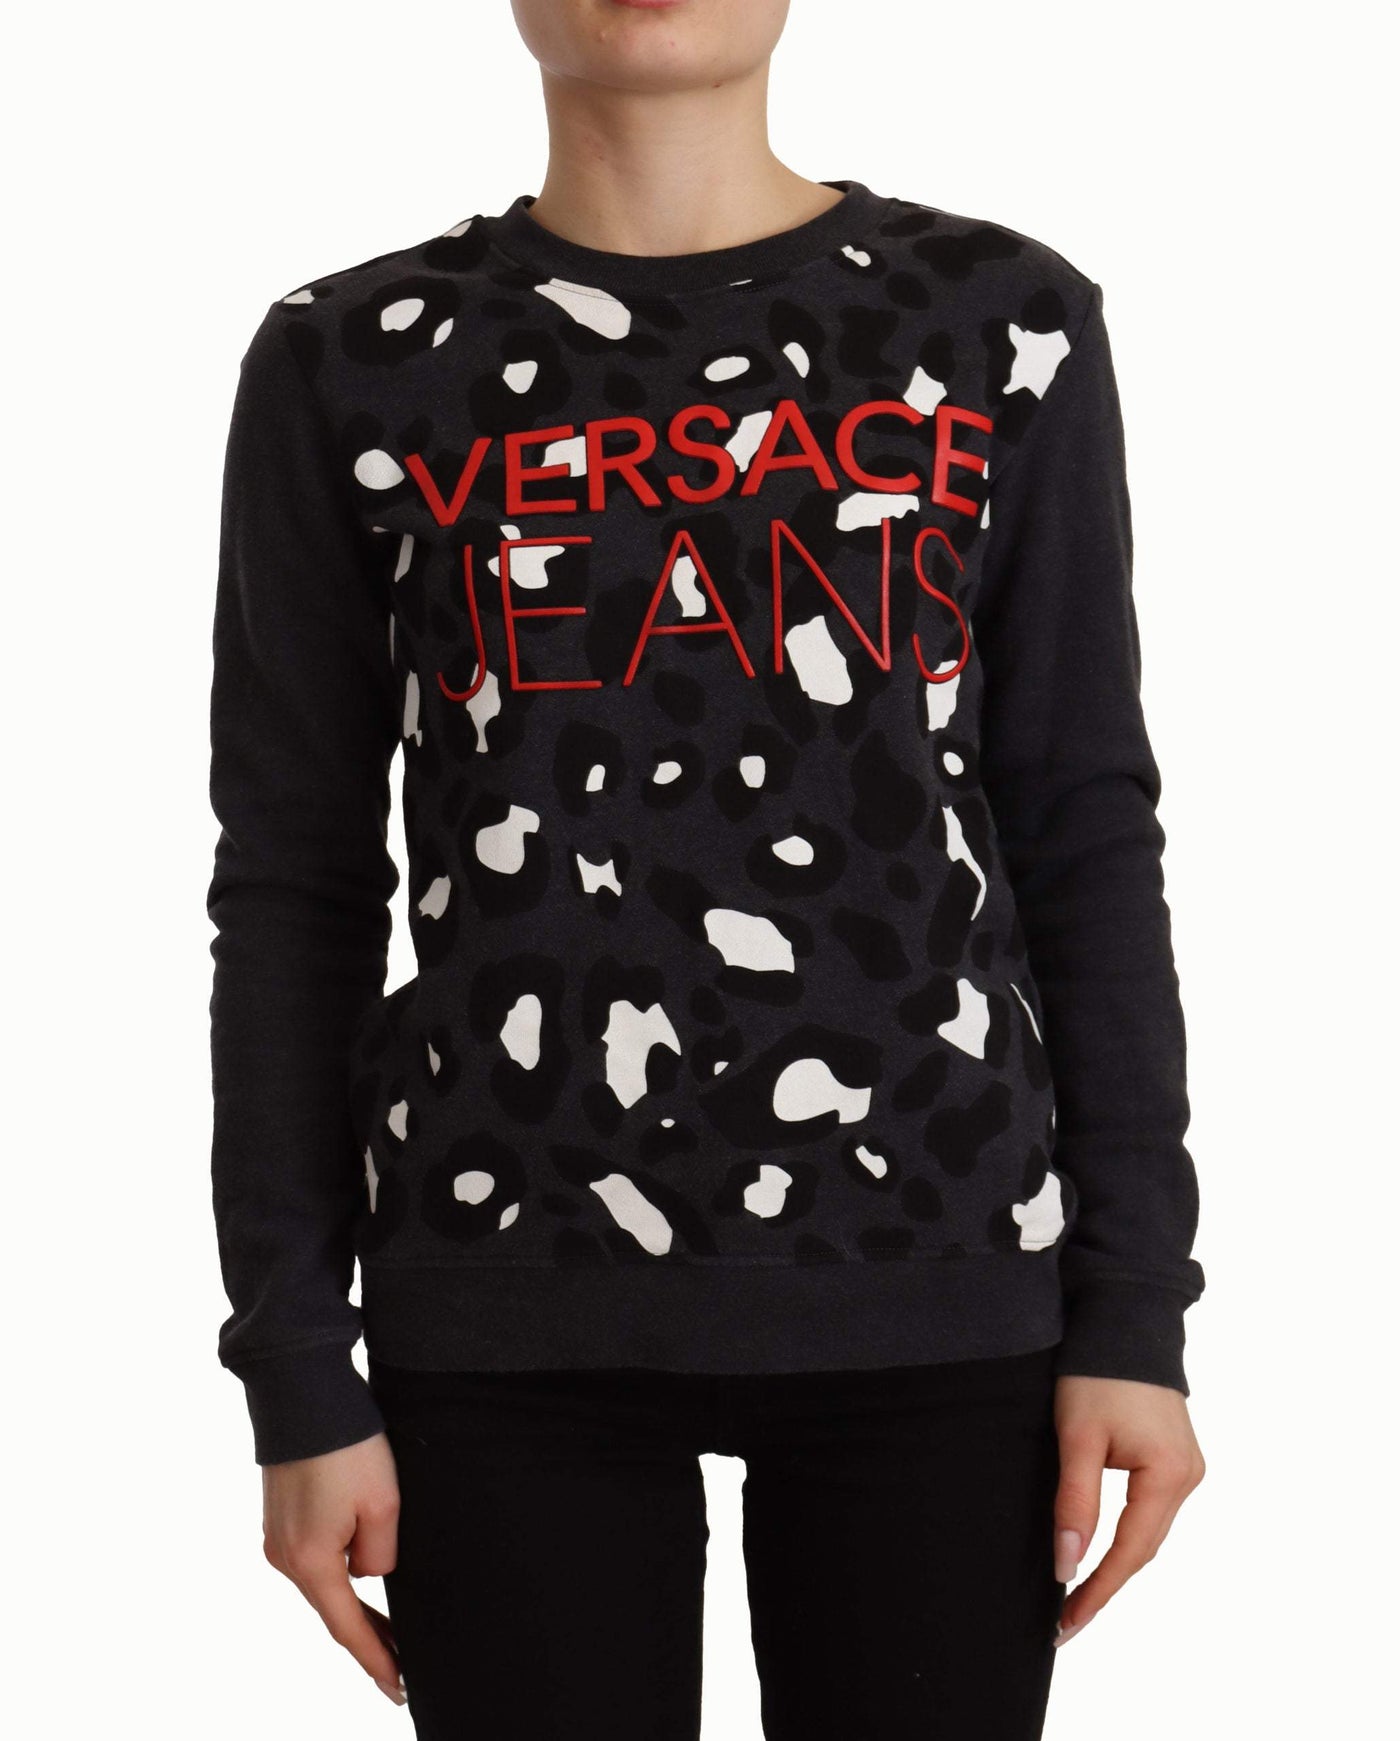 Versace Jeans Black Cotton Leopard Long Sleeves Pullover Sweater Black, feed-1, IT42|M, Sweaters - Women - Clothing, Versace Jeans at SEYMAYKA